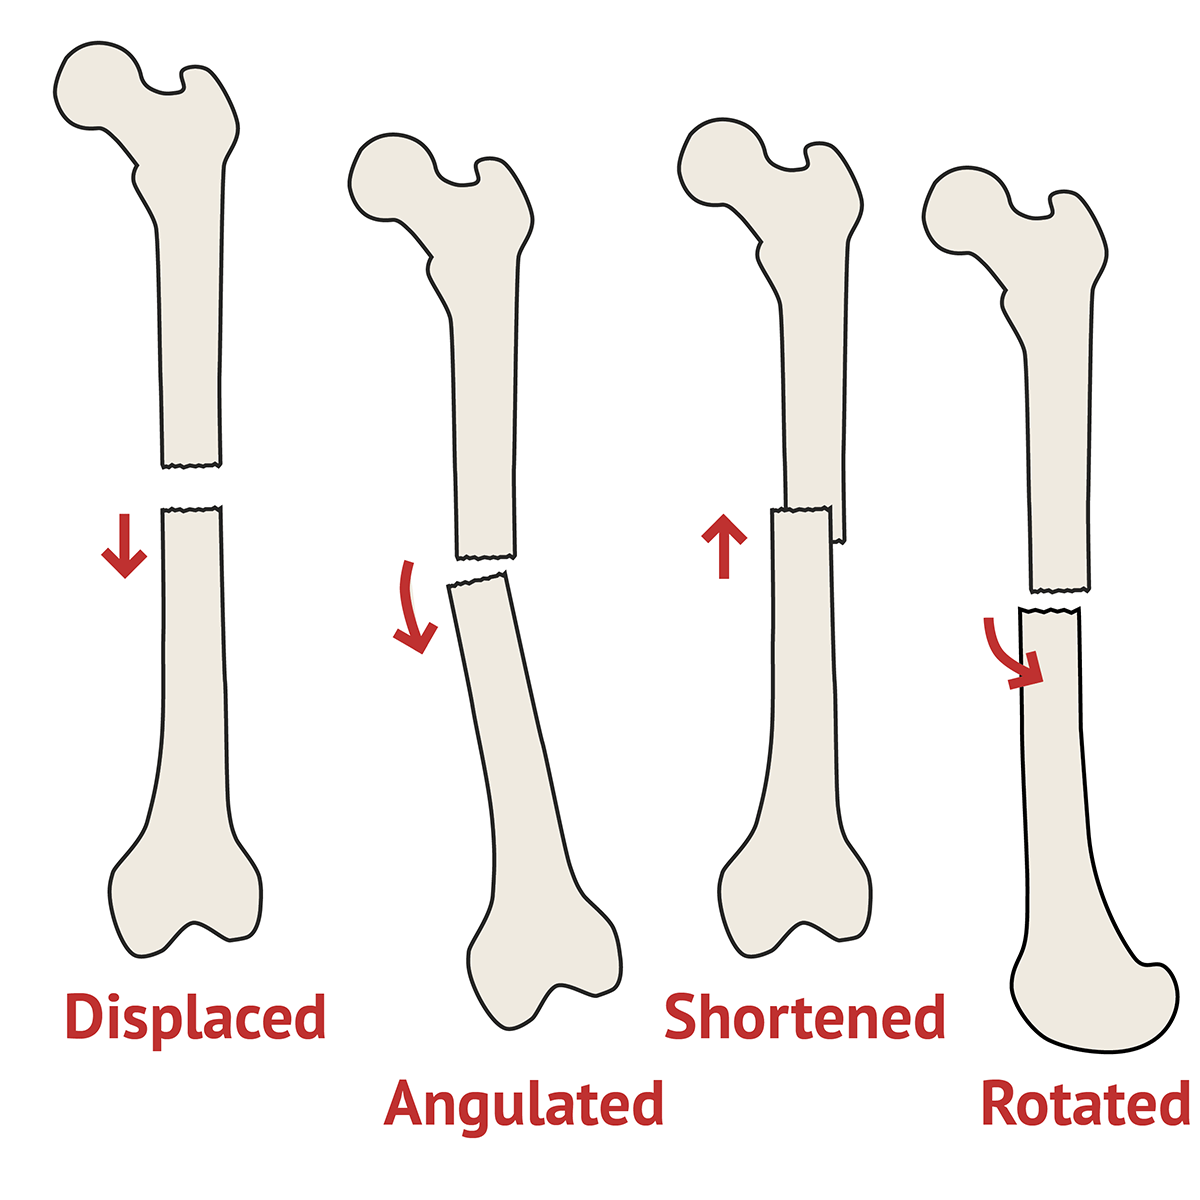 fracture fragments meaning